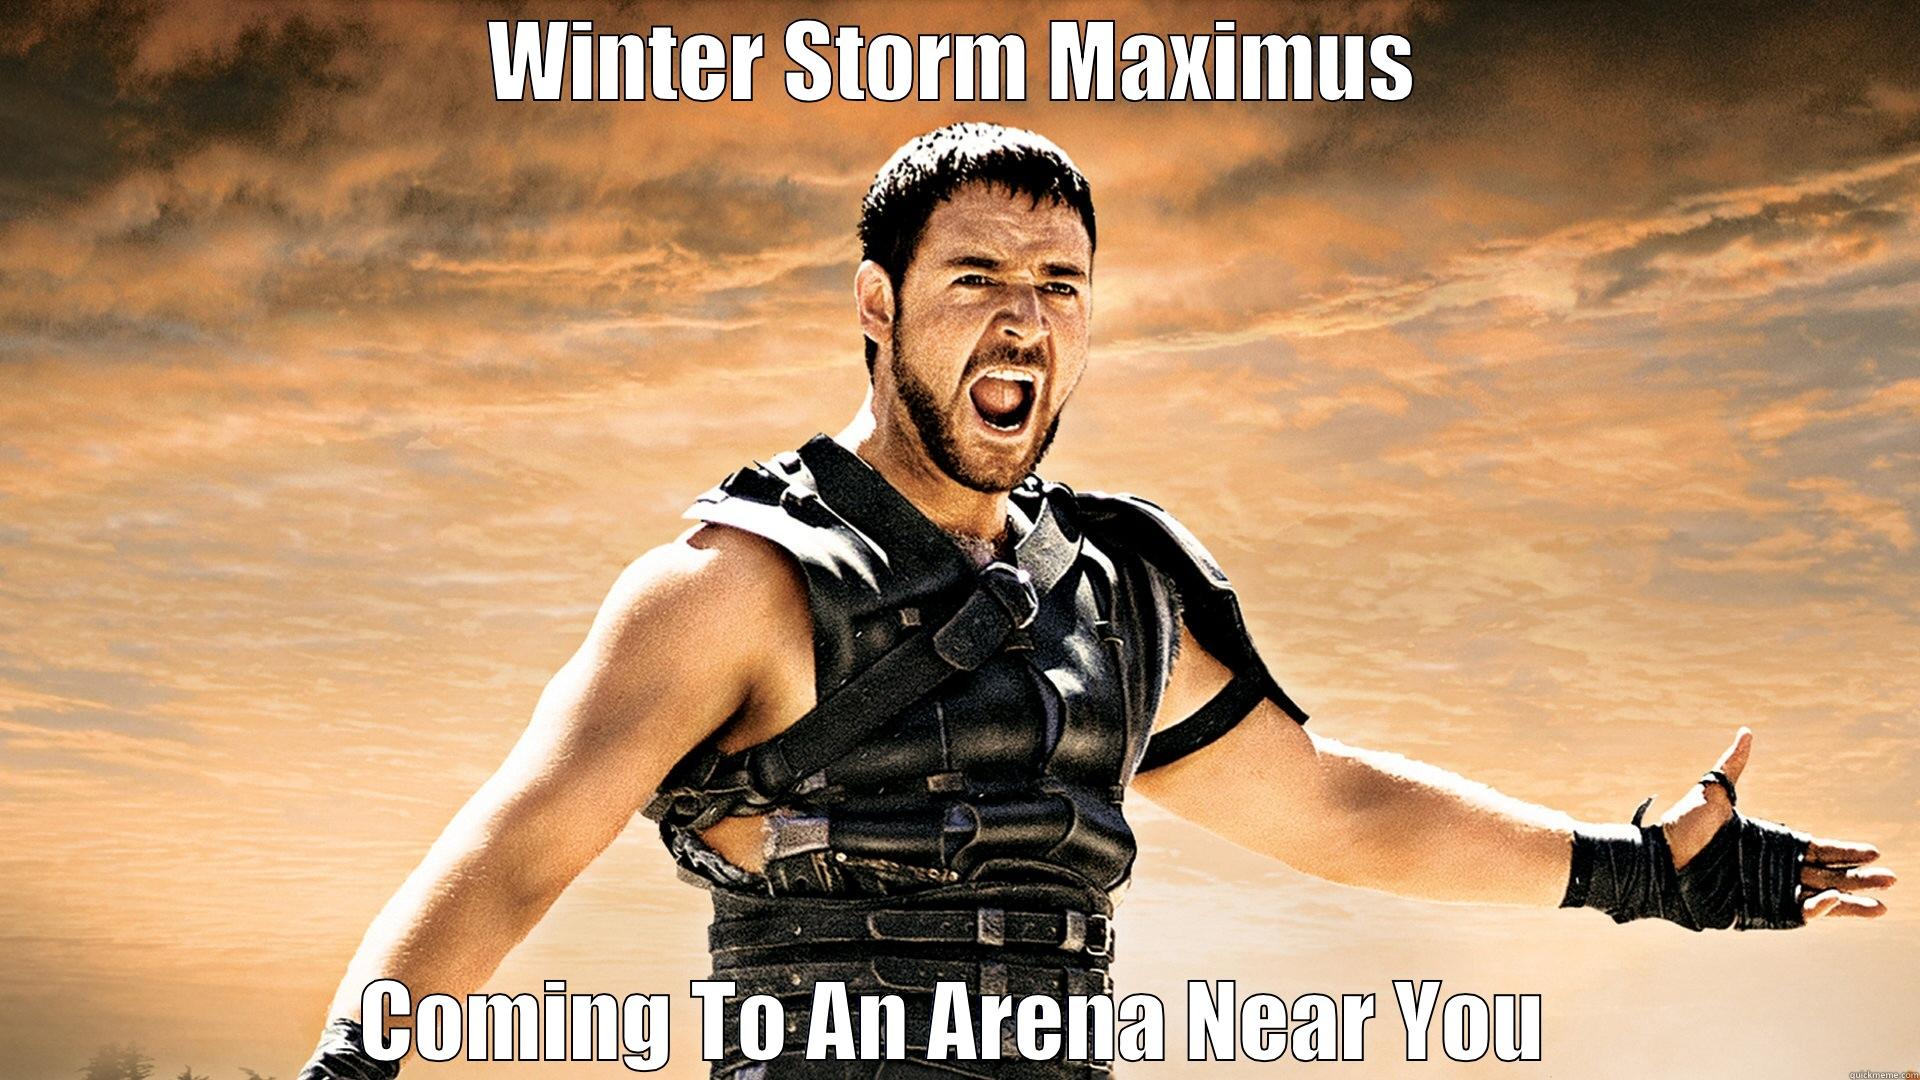 WINTER STORM MAXIMUS COMING TO AN ARENA NEAR YOU Misc